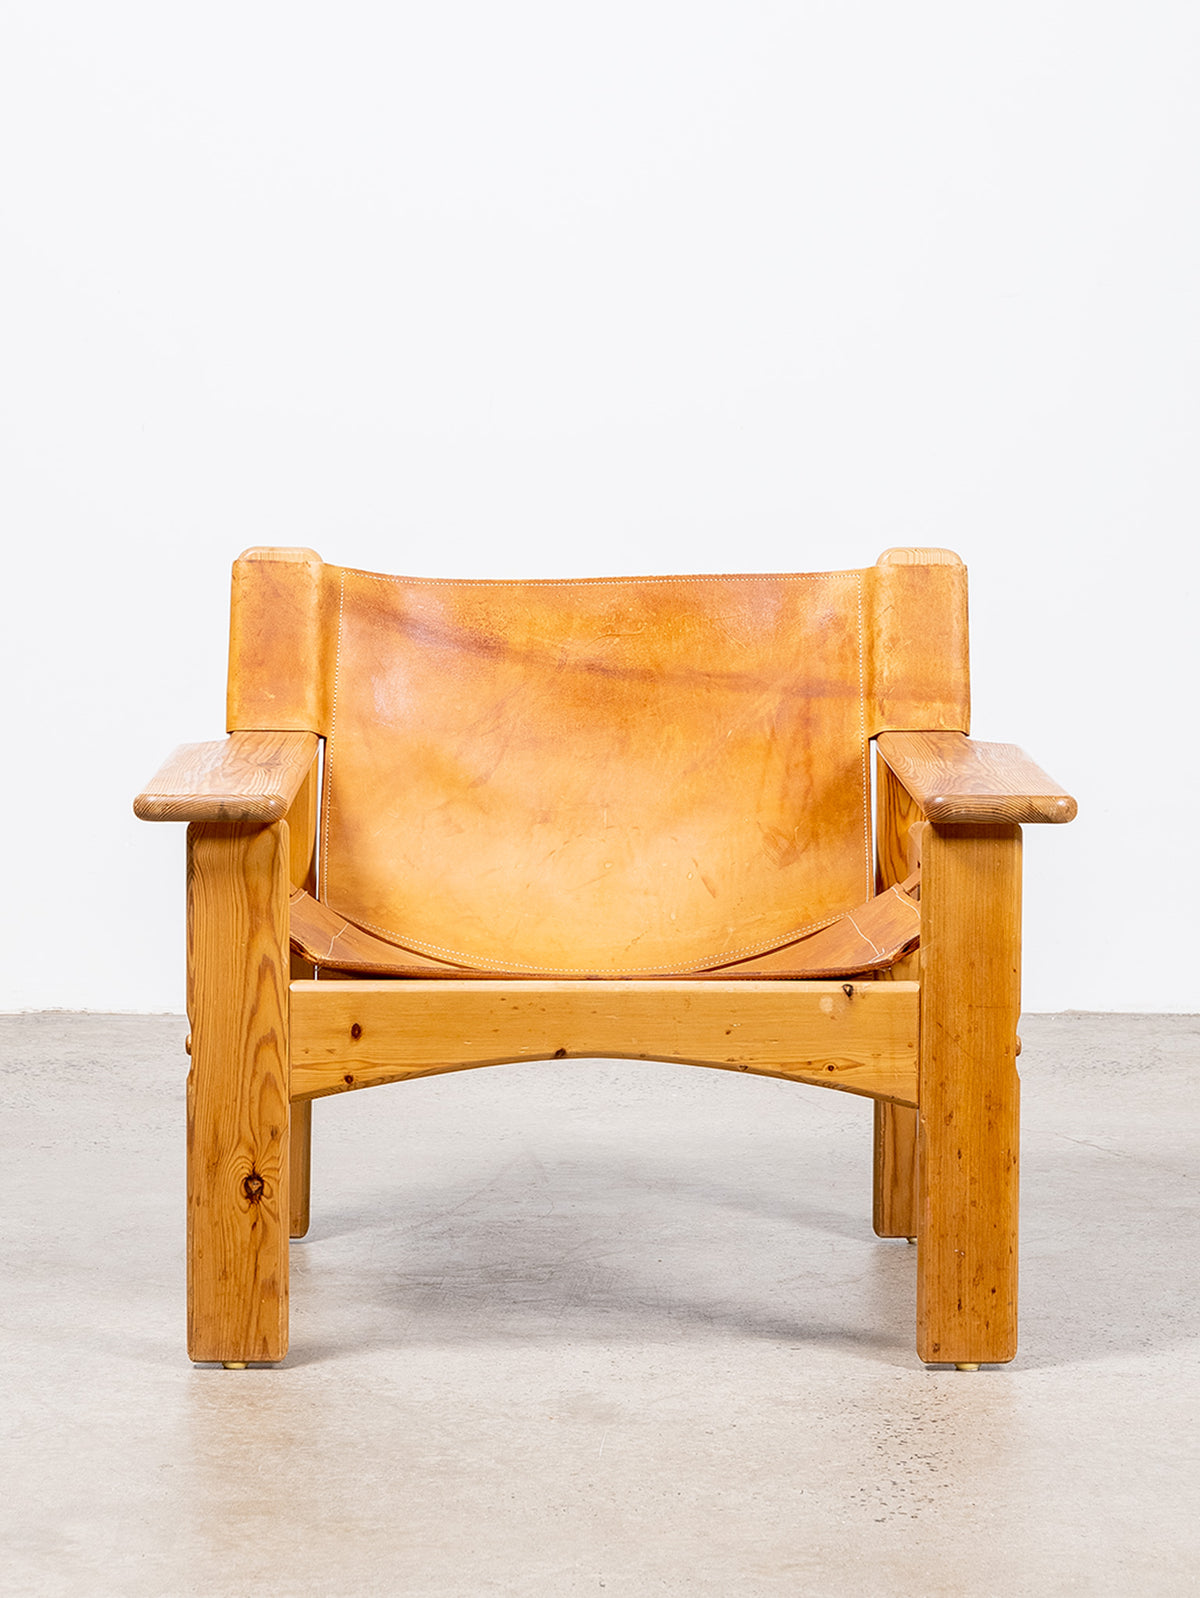 Danish Pine and Leather Mid-Century Armchairs